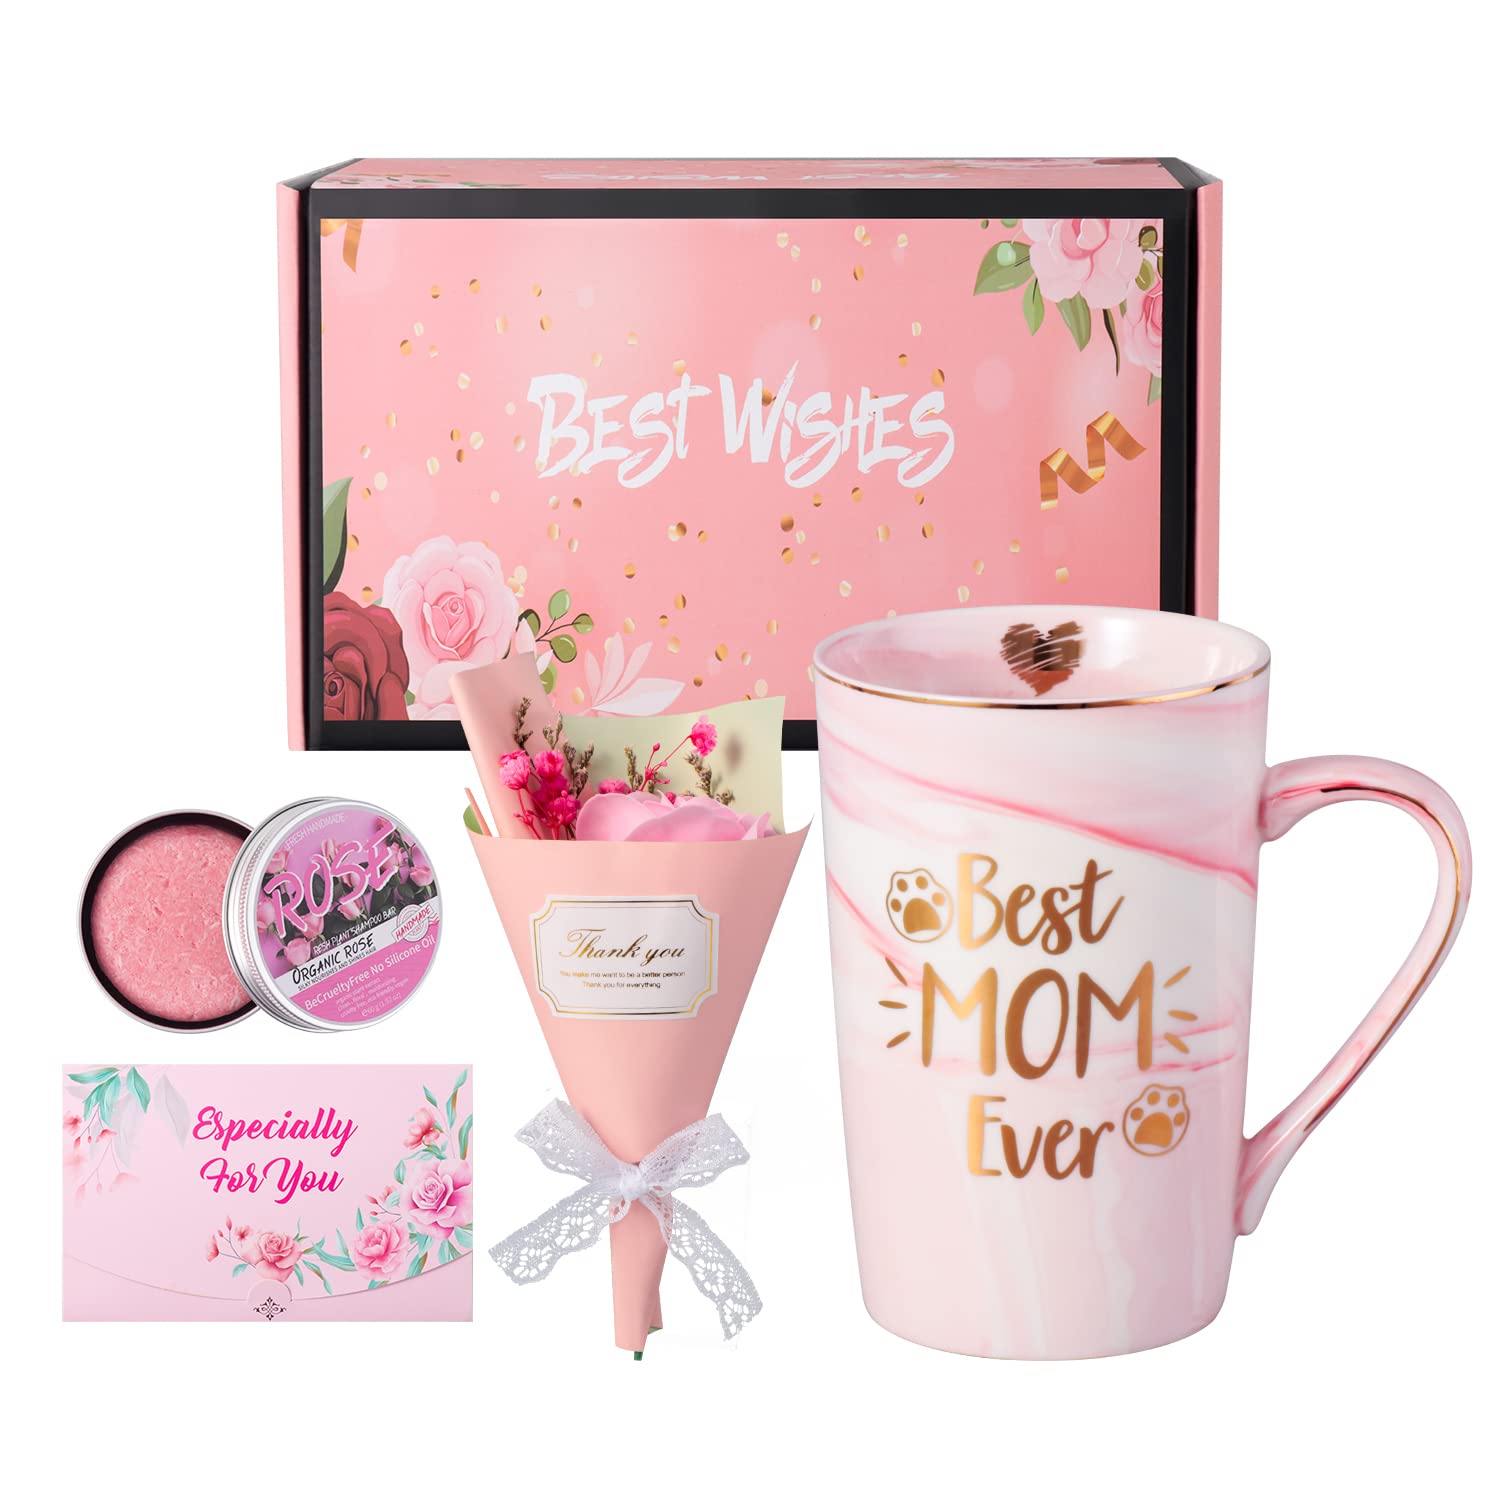 Best Mom Ever Coffee Mug, Gifts for Mom - Best Mother's Day Birthday Gift Set, Novelty Ceramic Cup Gifts Set with Rose Flower Shampoo Bar from Daughter Son for Mother Christmas Moms Family Day